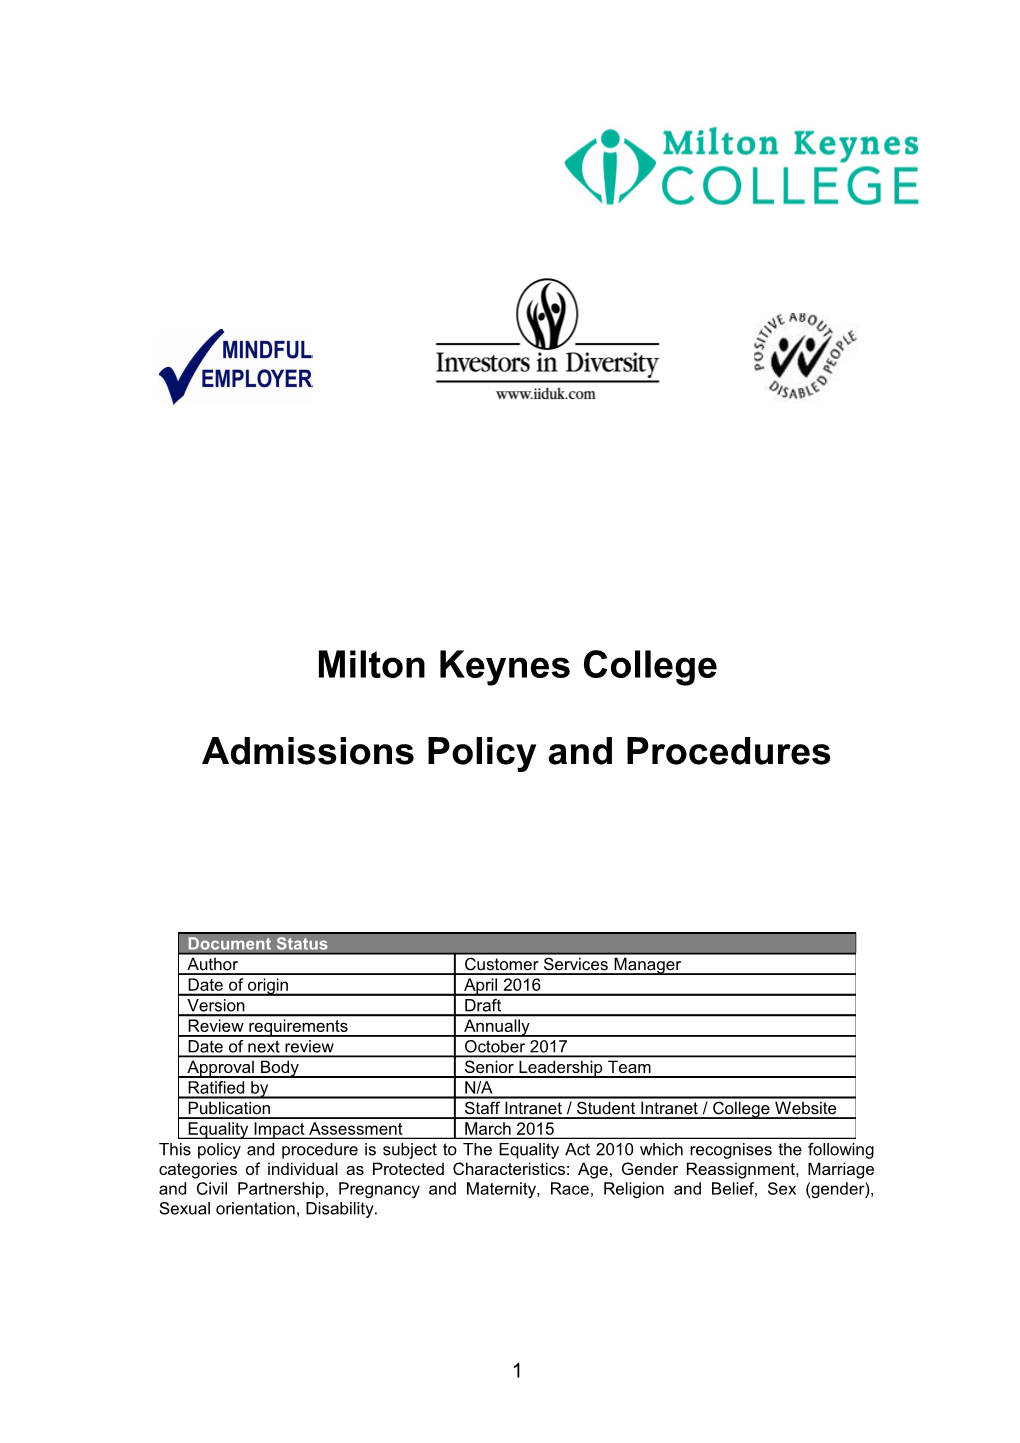 Admissions Policy and Procedures